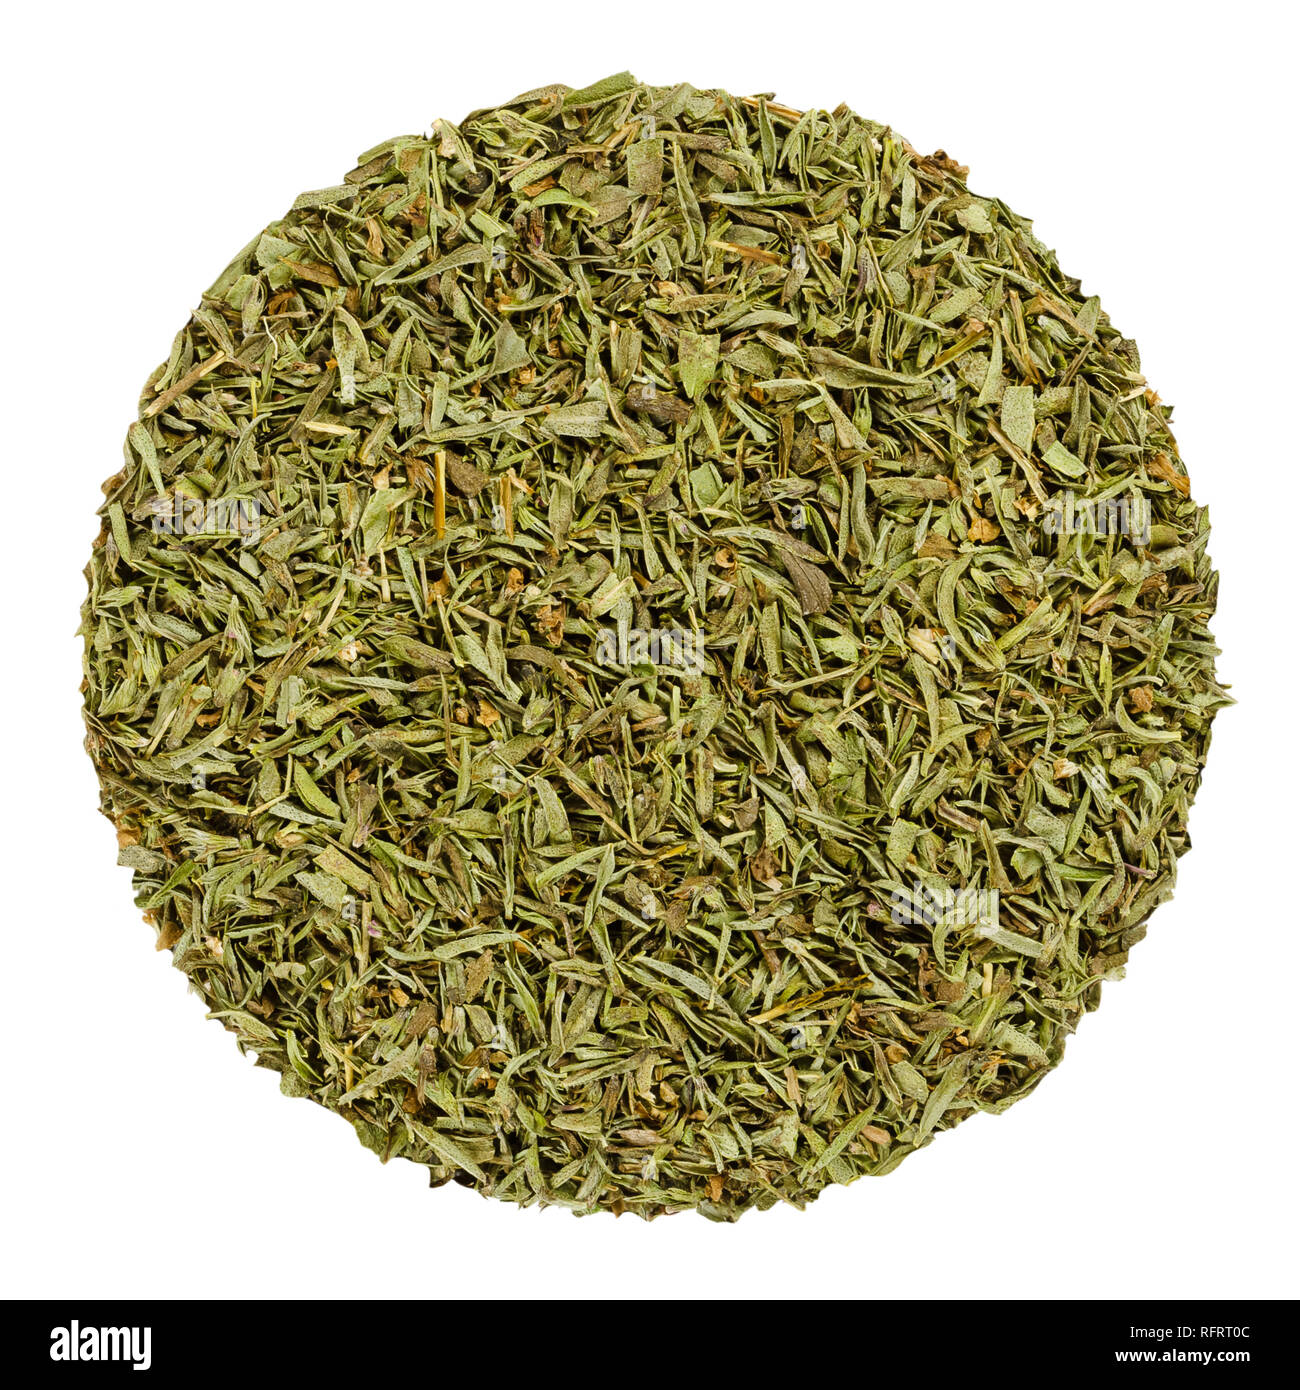 Dried savory. Herb circle from above isolated over white. Disc made of chopped summer savory, Satureja hortensis, a green herb and seasoning. Stock Photo